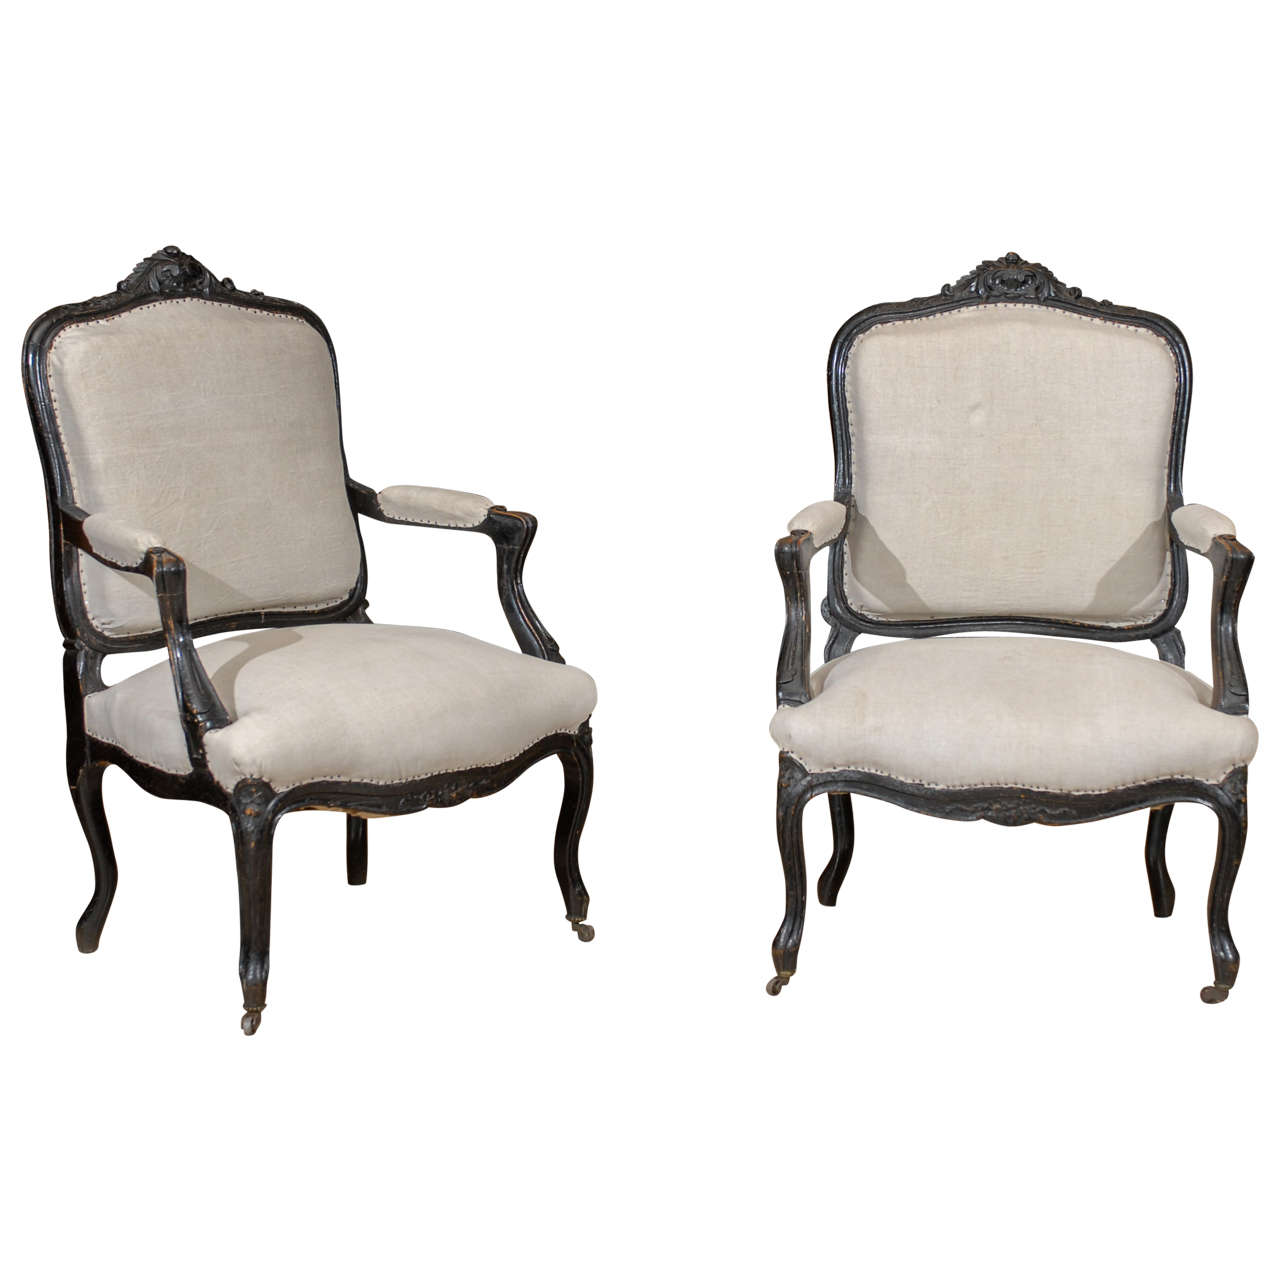 Pair of 19th Century Black Painted Louis XV style Arm Chairs, Circa 1880 For Sale